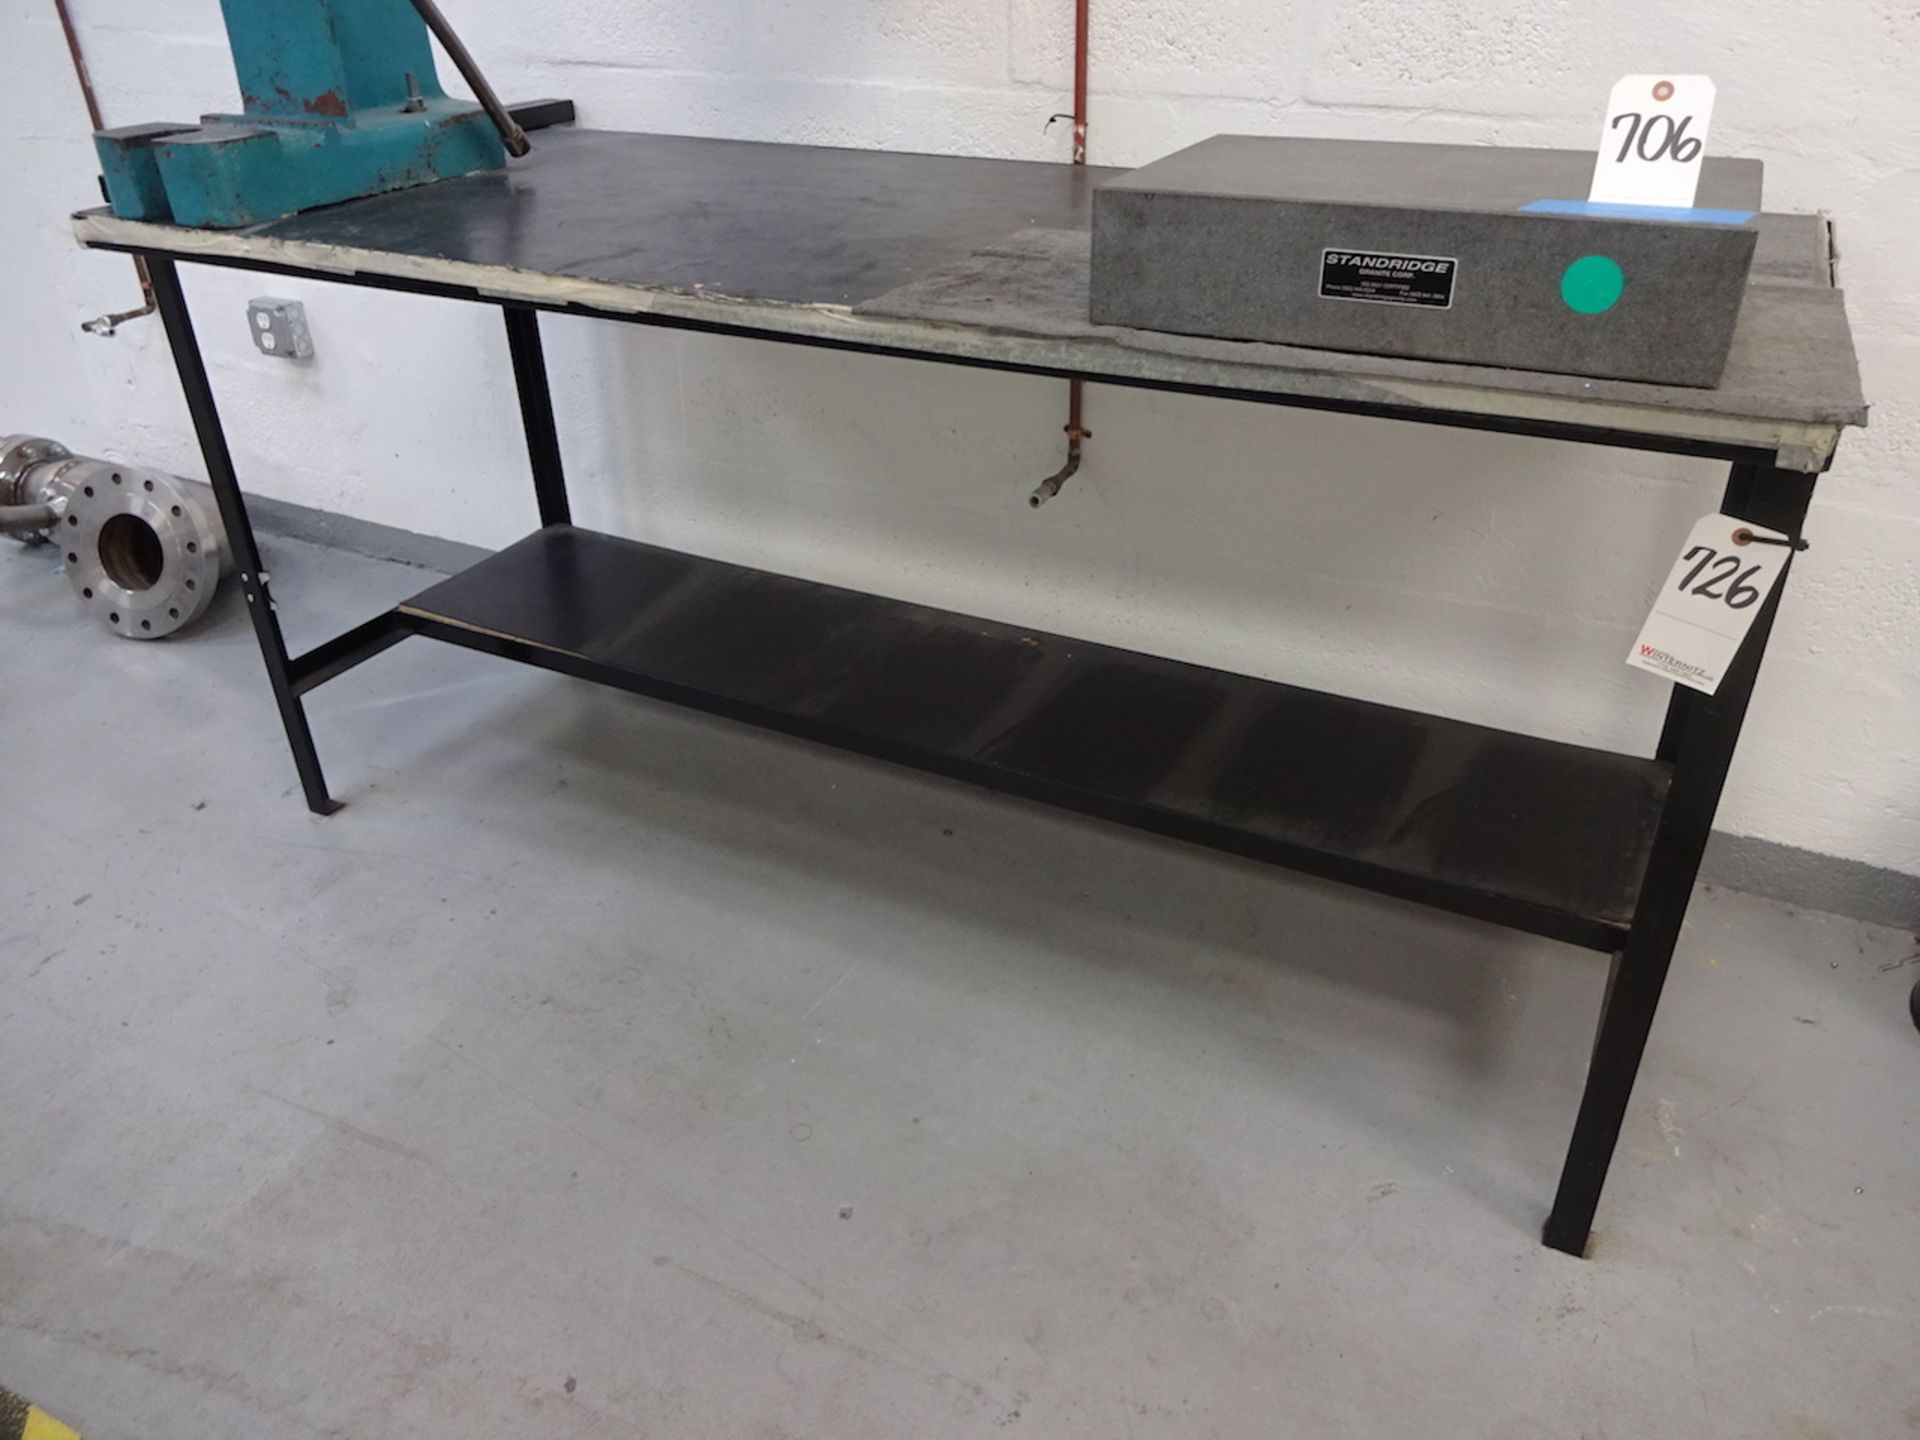 30" X 72" (APPROX.) STEEL TABLE; Plastic Top Cover